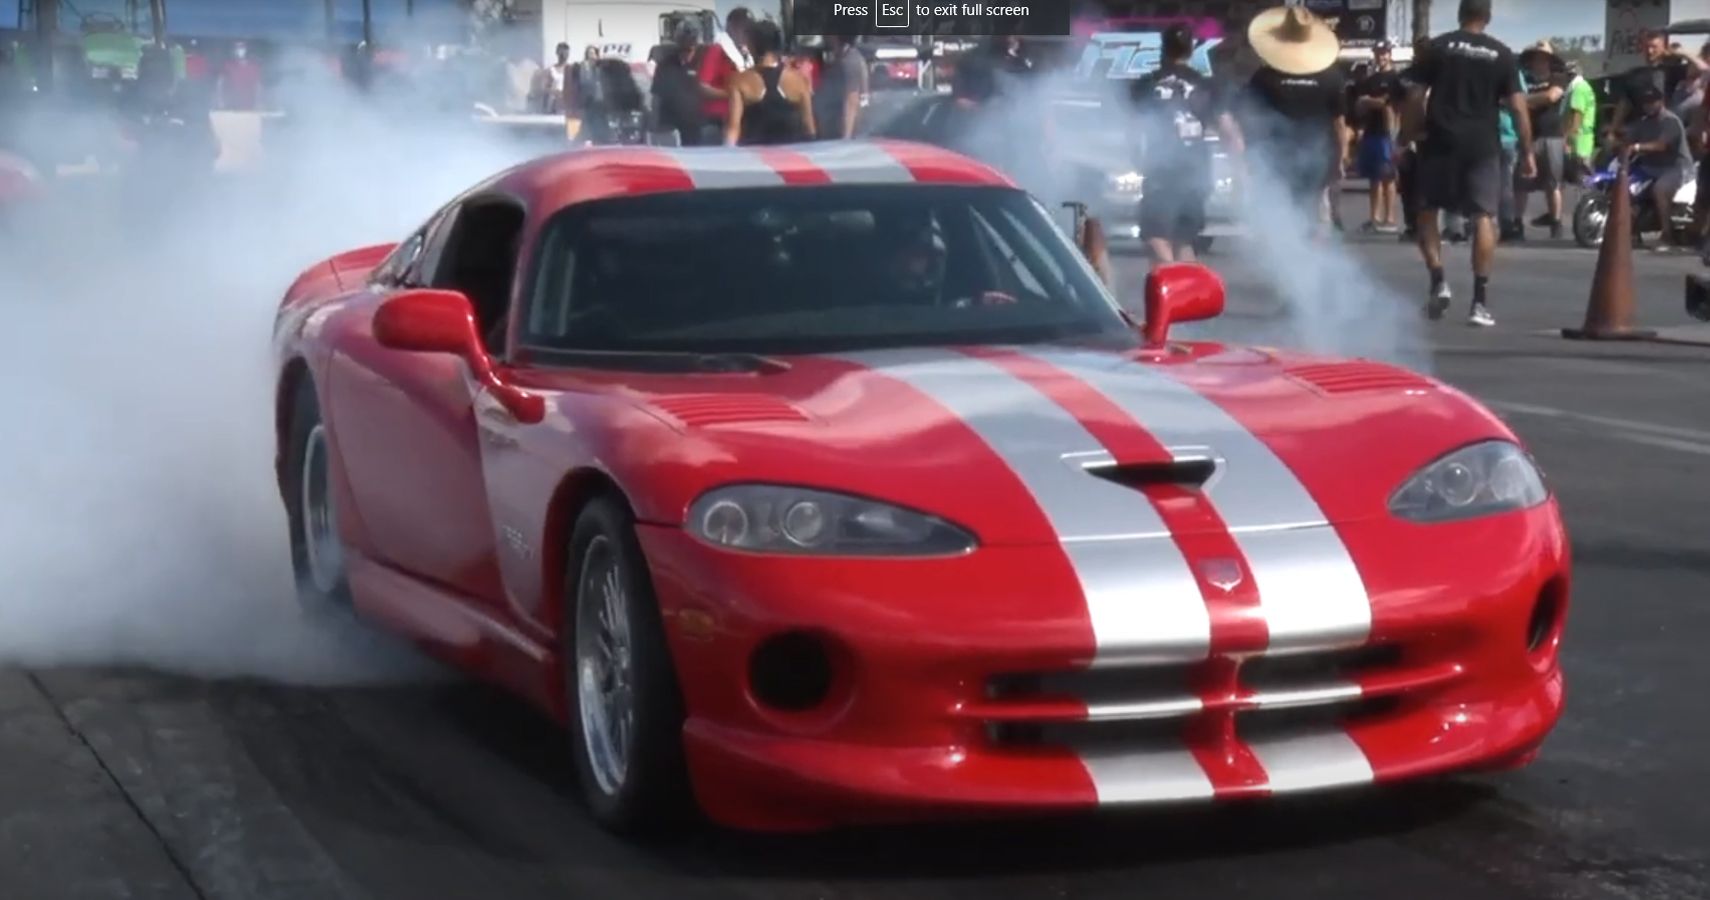 Watch This 3000-HP Twin-Turbo "Juggernaut" Dodge Viper Unleashed At Florida Dragstrip